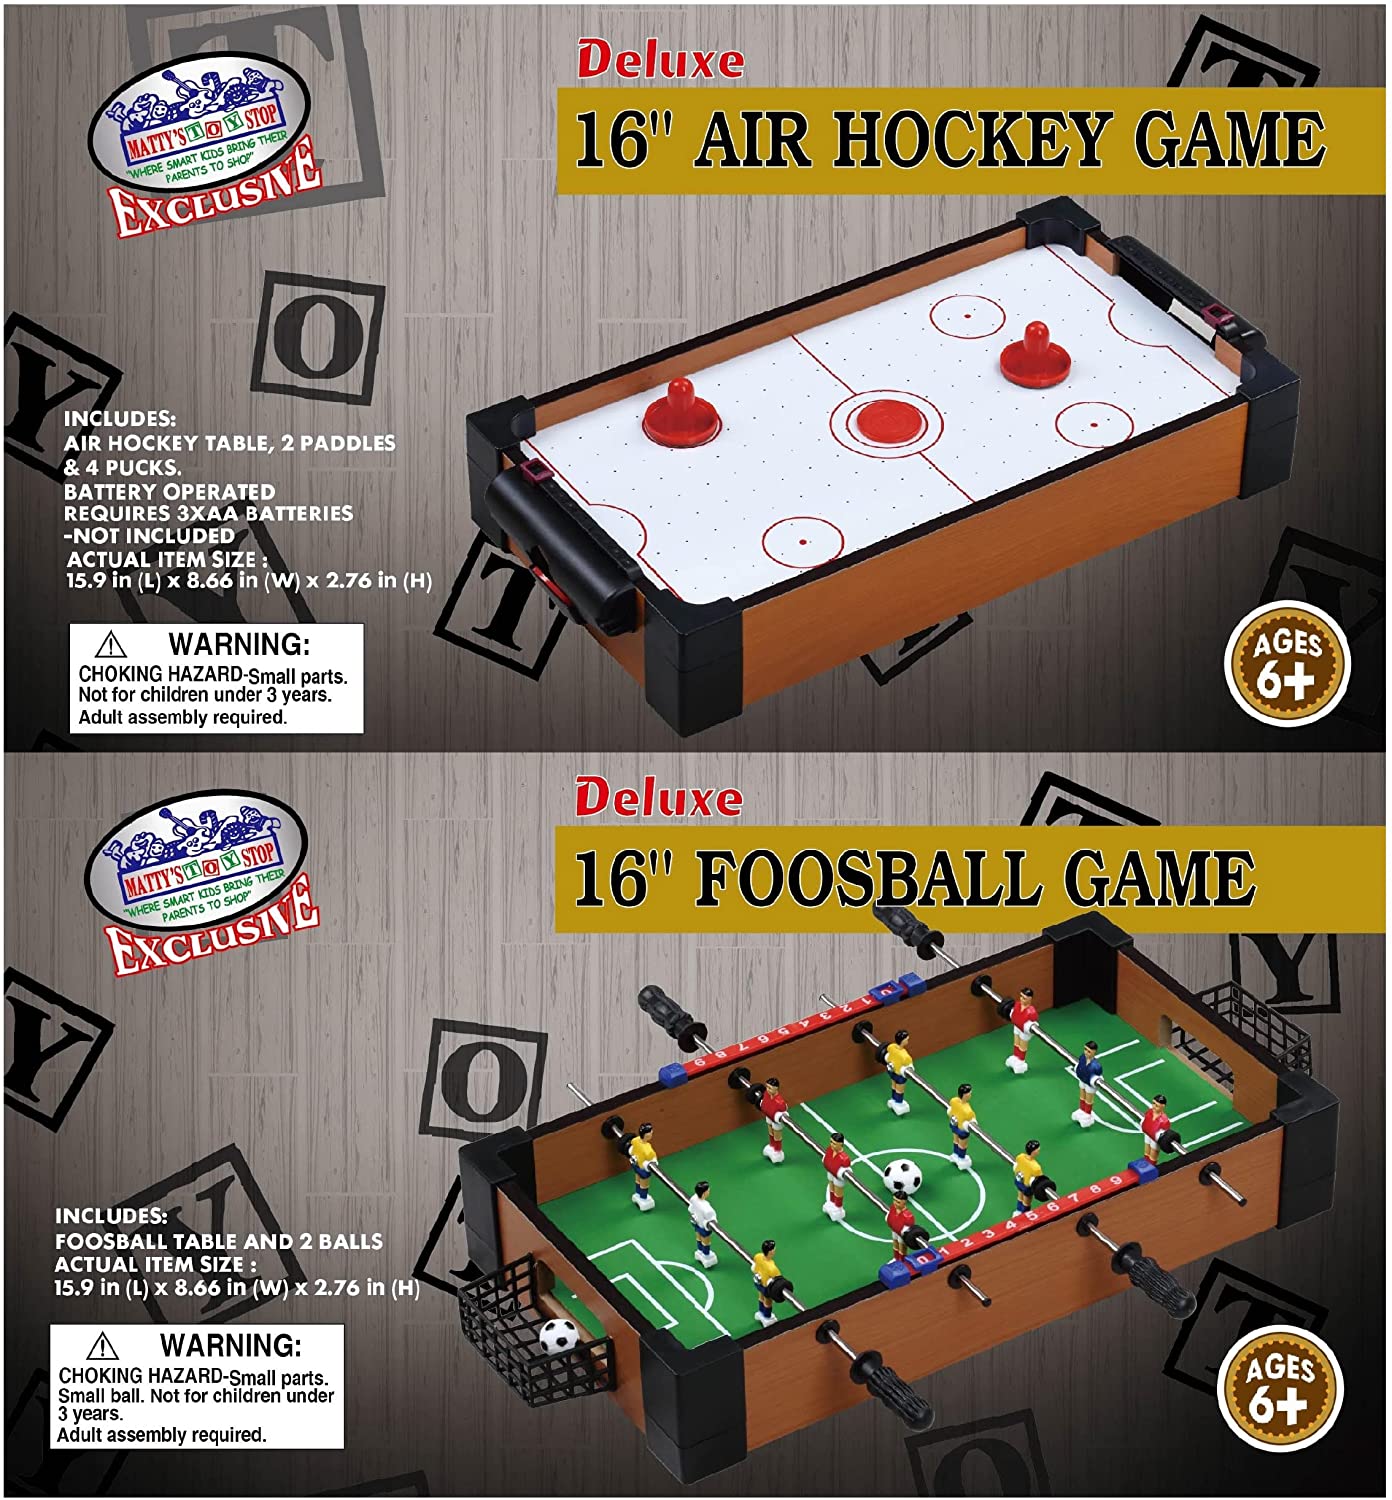 On the top corner is the assembled air hockey tabletop and below is a foosball table with a green-colored surface